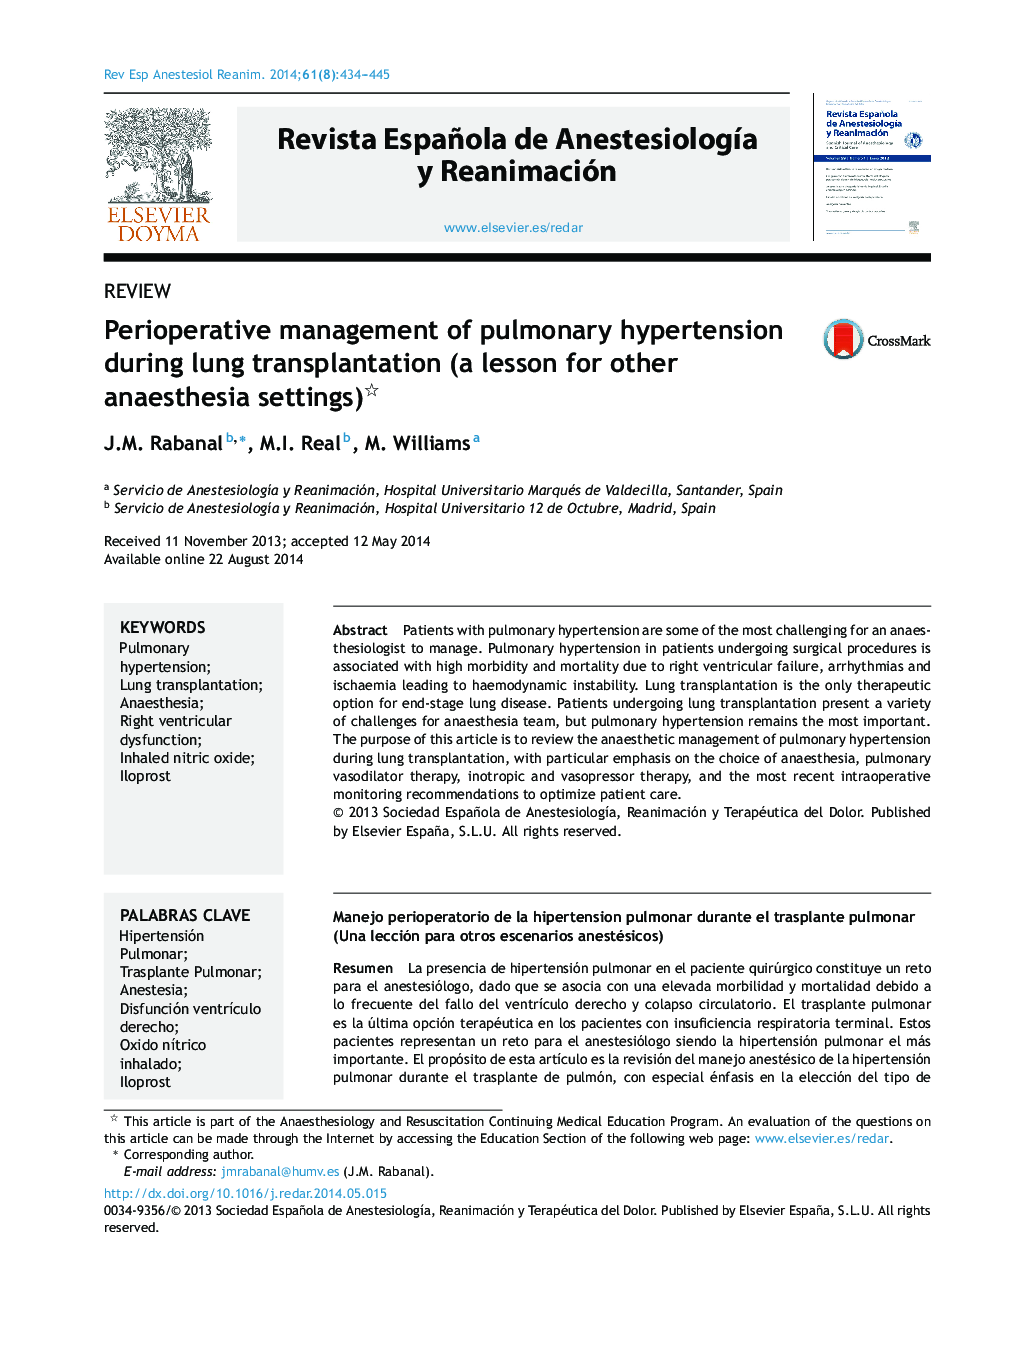 Perioperative management of pulmonary hypertension during lung transplantation (a lesson for other anaesthesia settings)